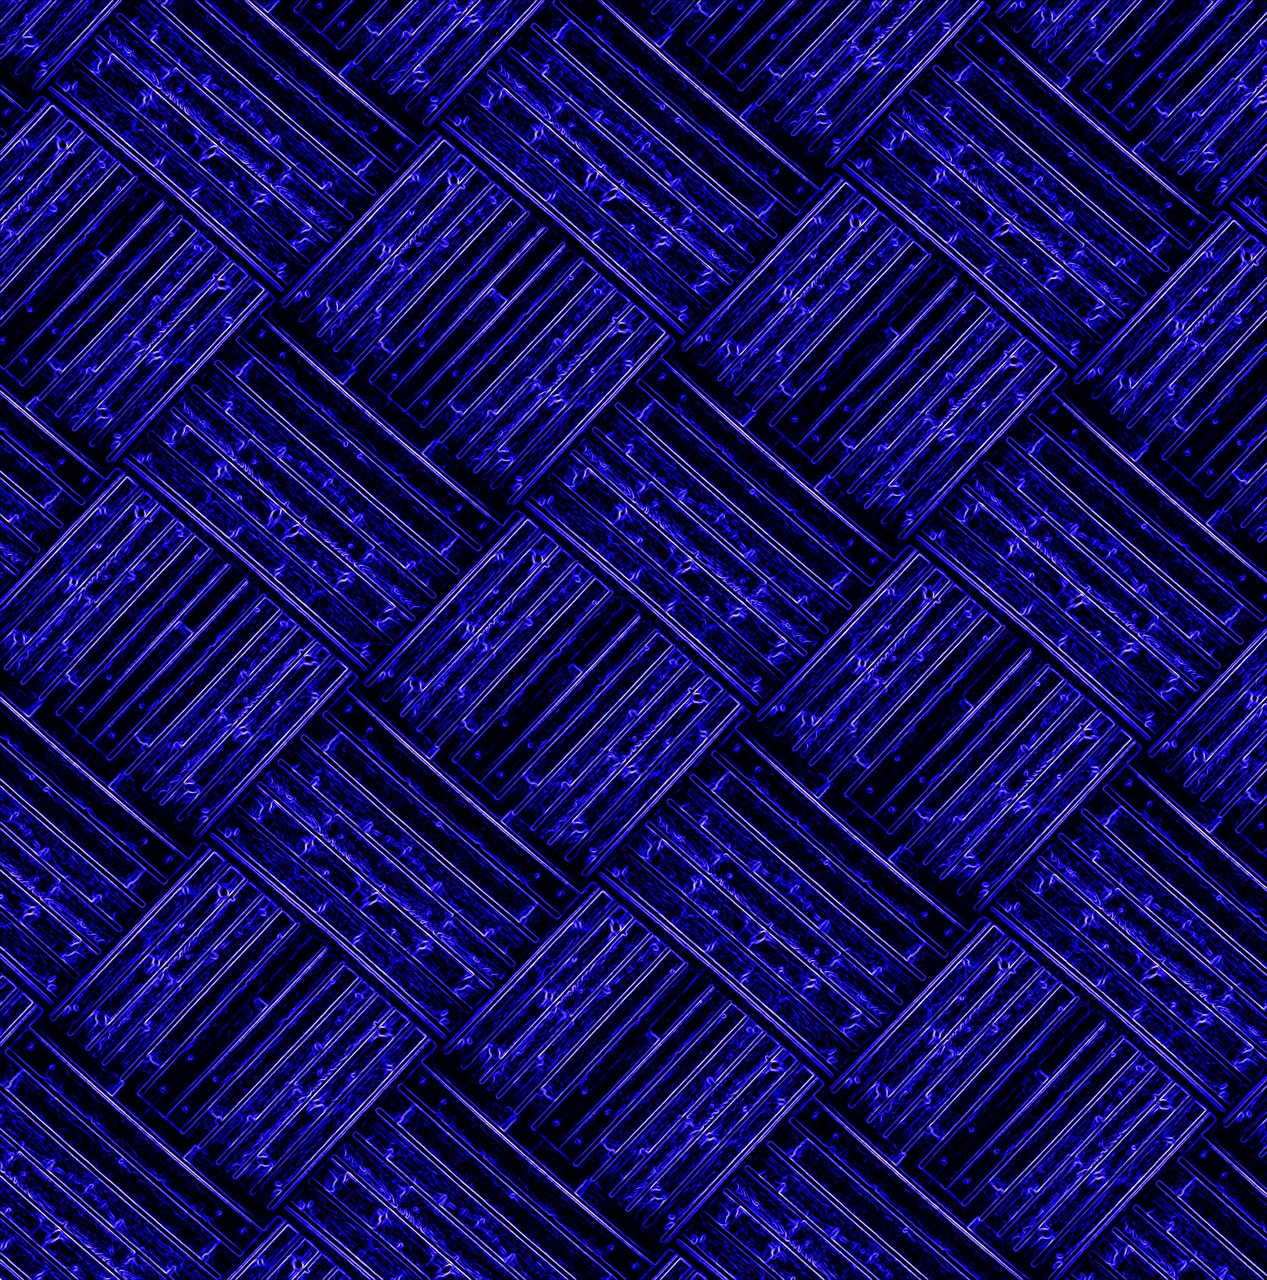 Royal blue color grid pattern background with dimensional texture